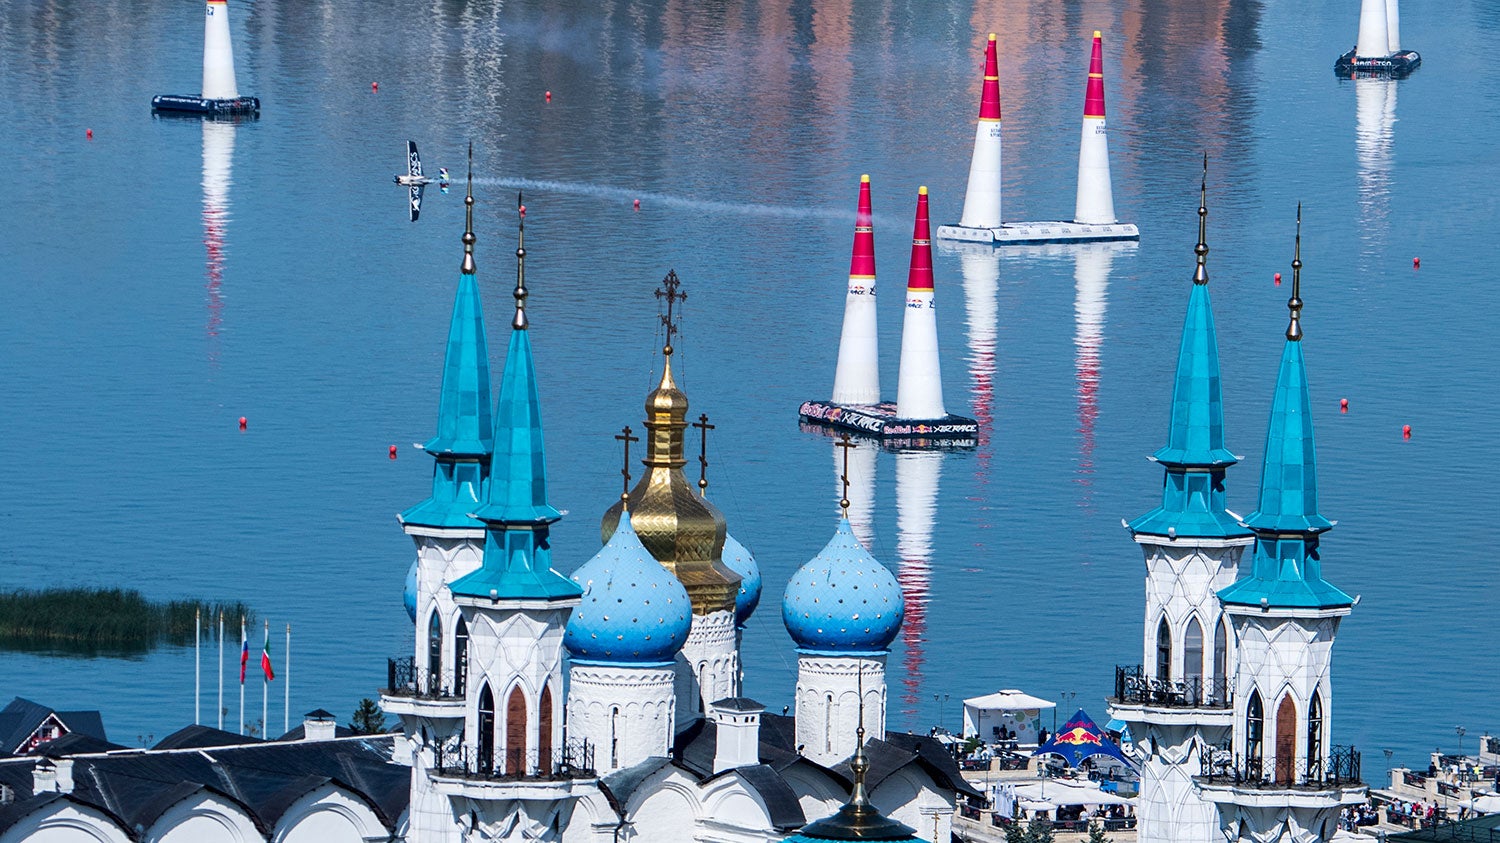 Michael Goulian Snags Top Spot After Red Bull Air Race in Russia